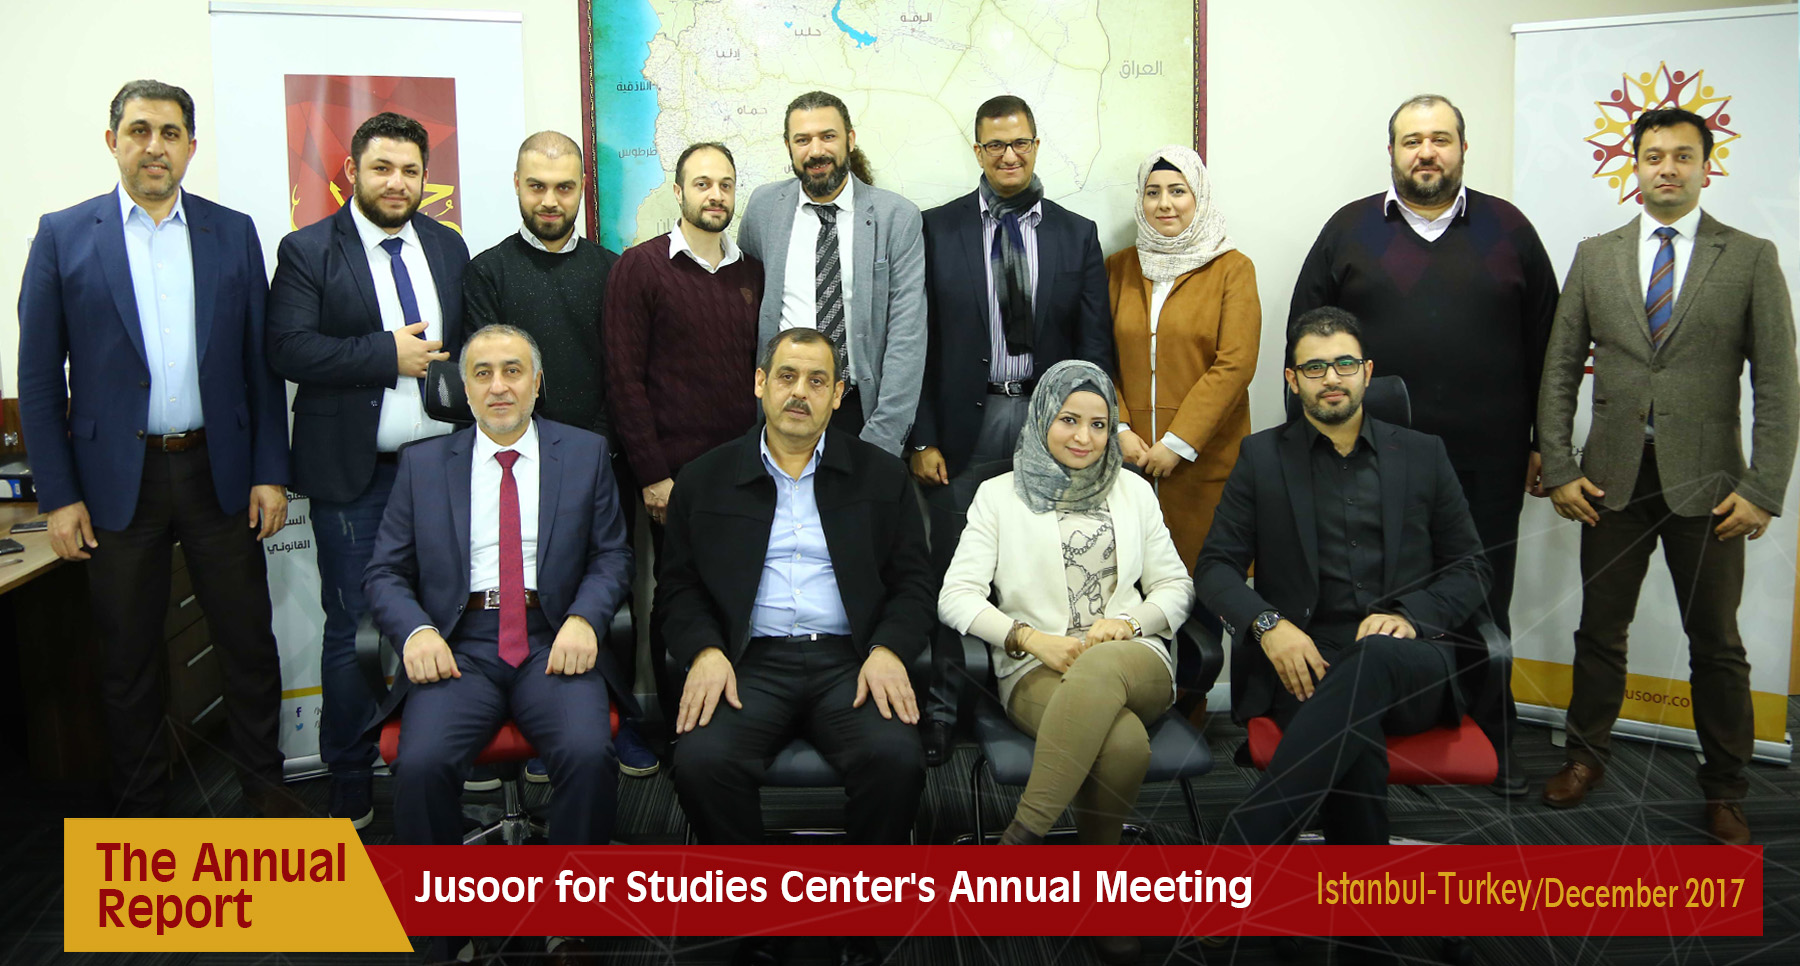 Report about Jusoor for Studies Center’s Annual Meeting in December 2017